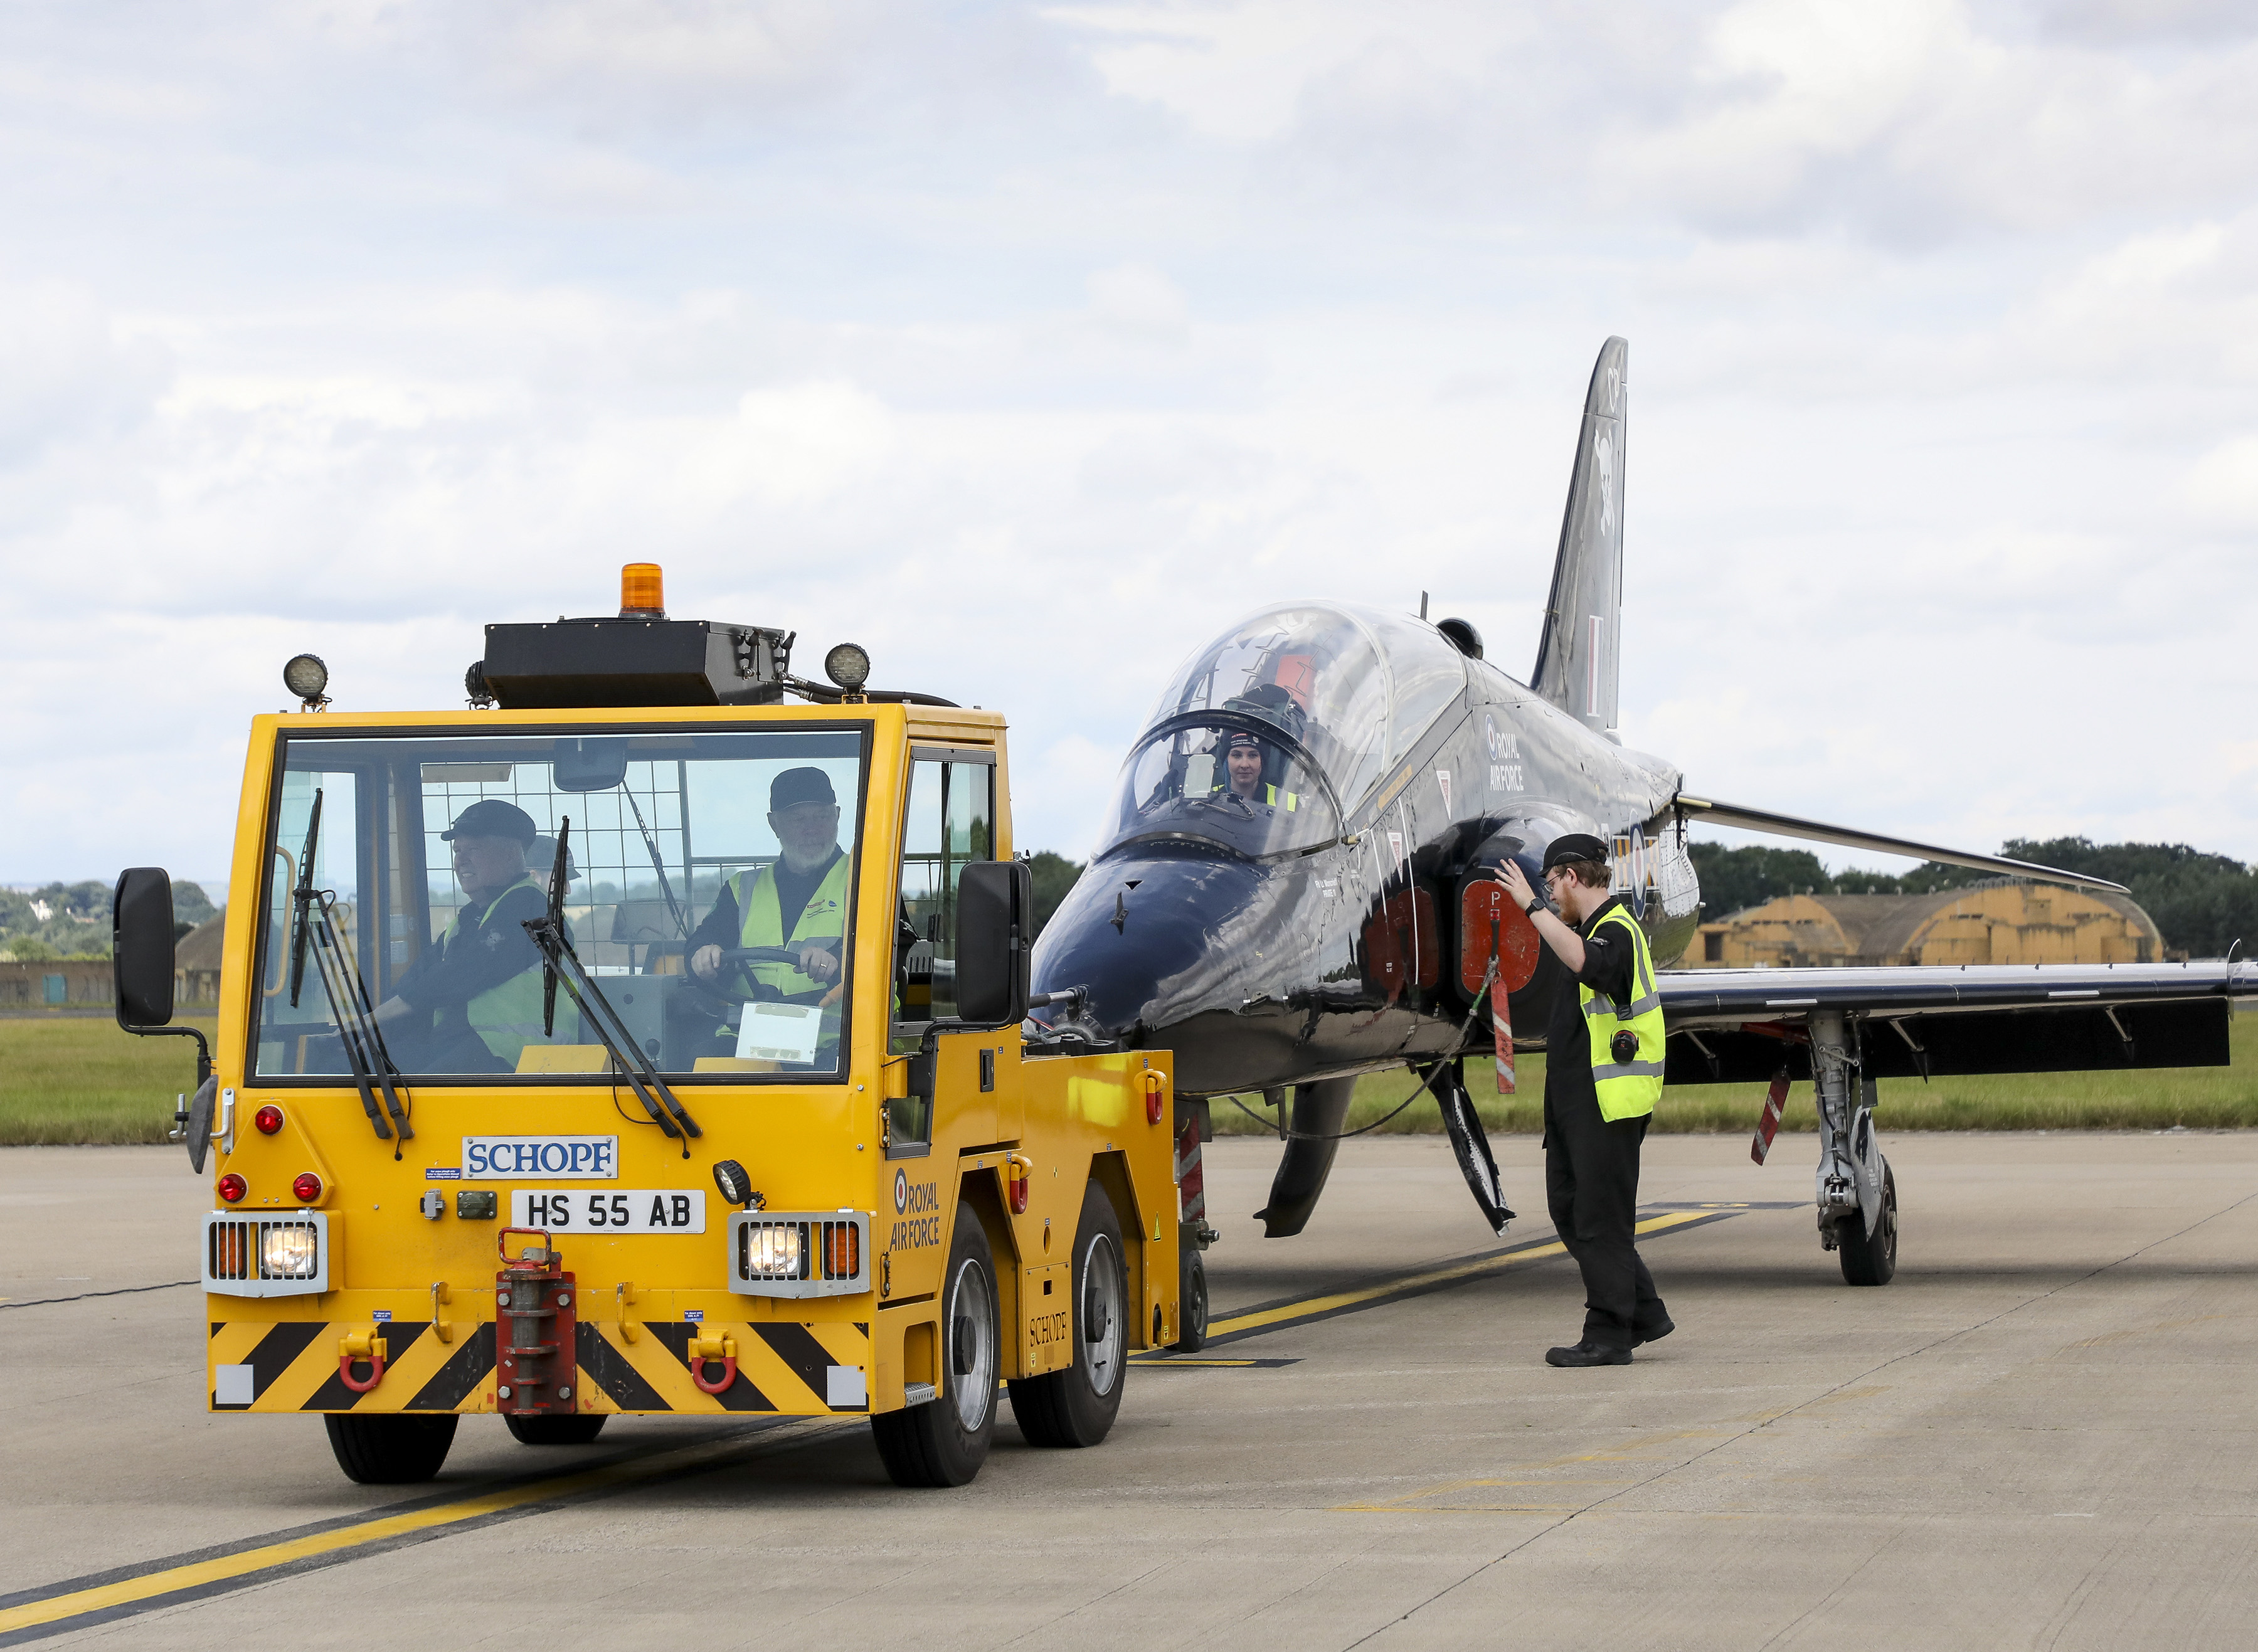 Image shows a Towing Tractor vehicle towing a Hawk T2 aircraft on the airfield.